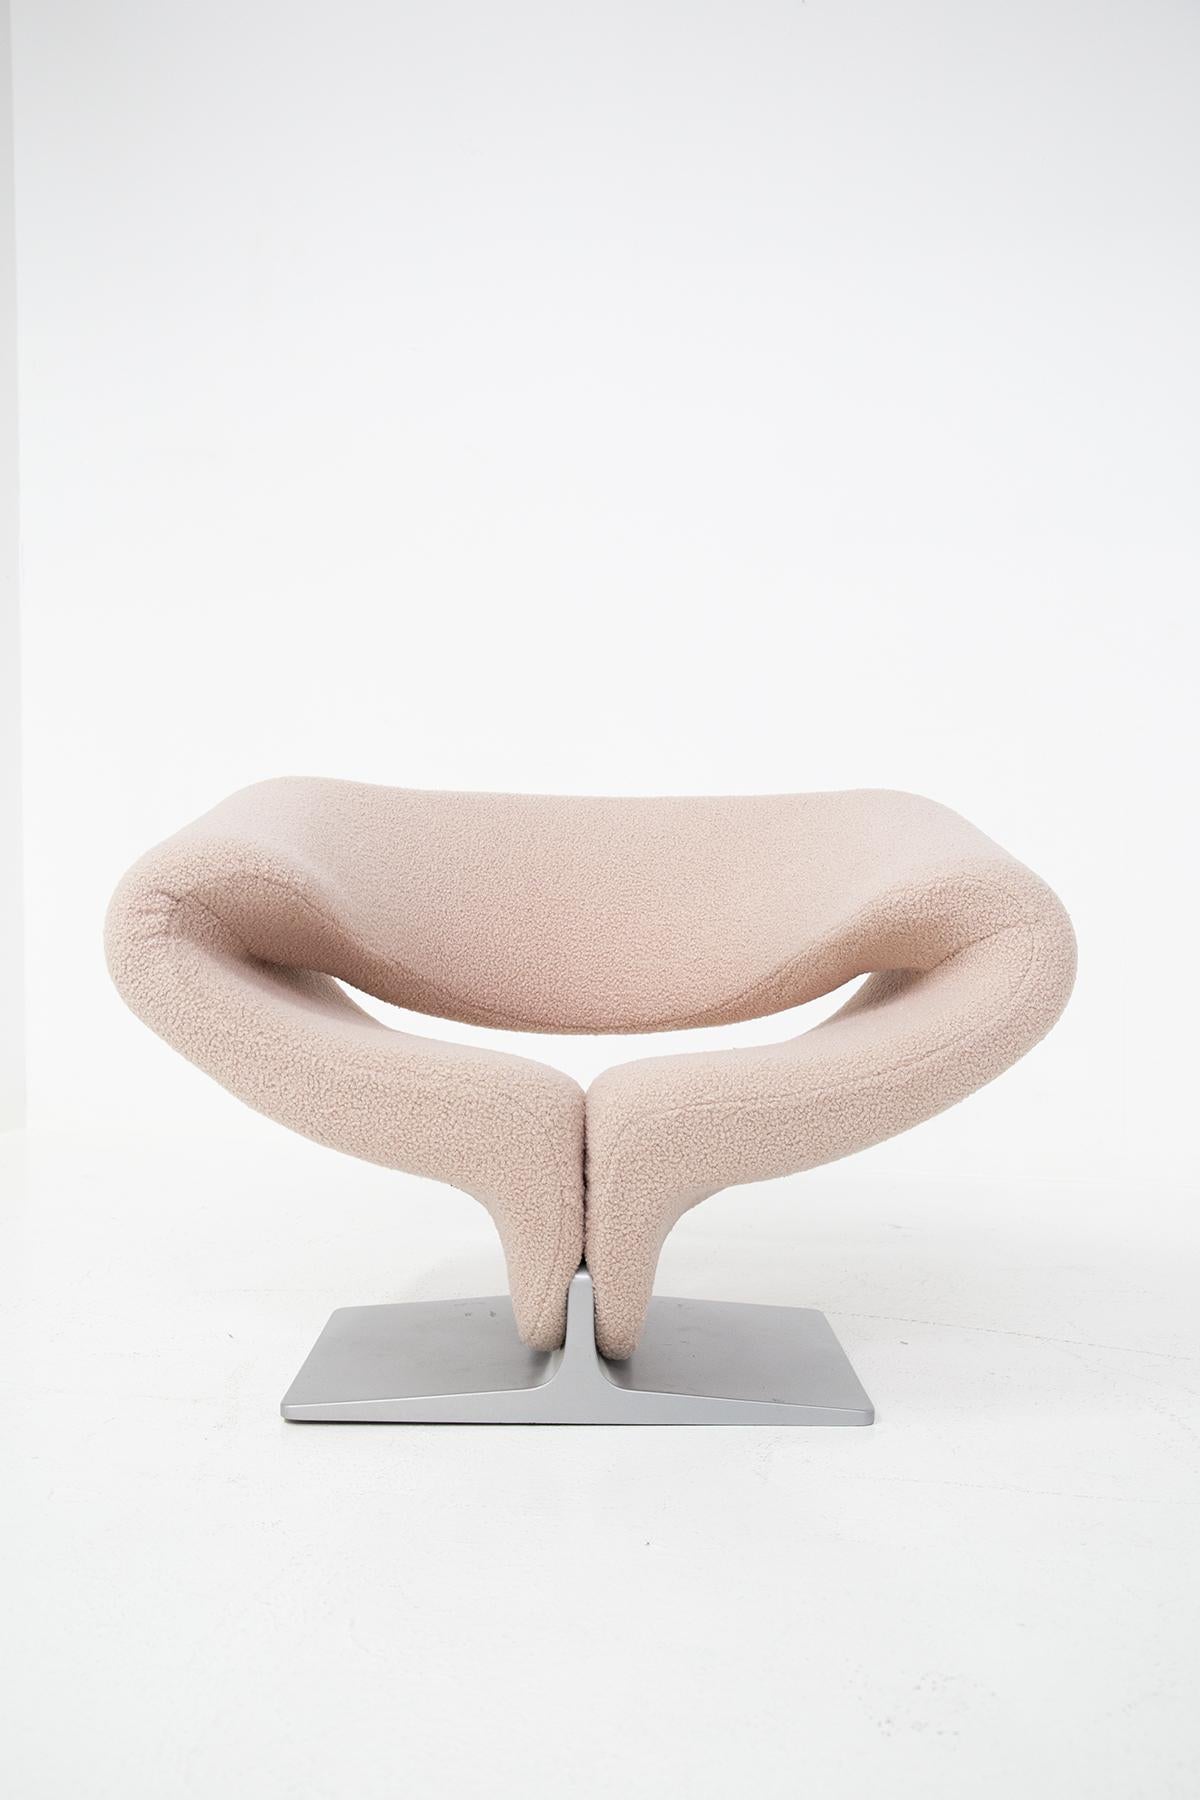 Pierre Paulin Ribbon Armchairs for Artifort in Pink Bouclè, First Edition 7